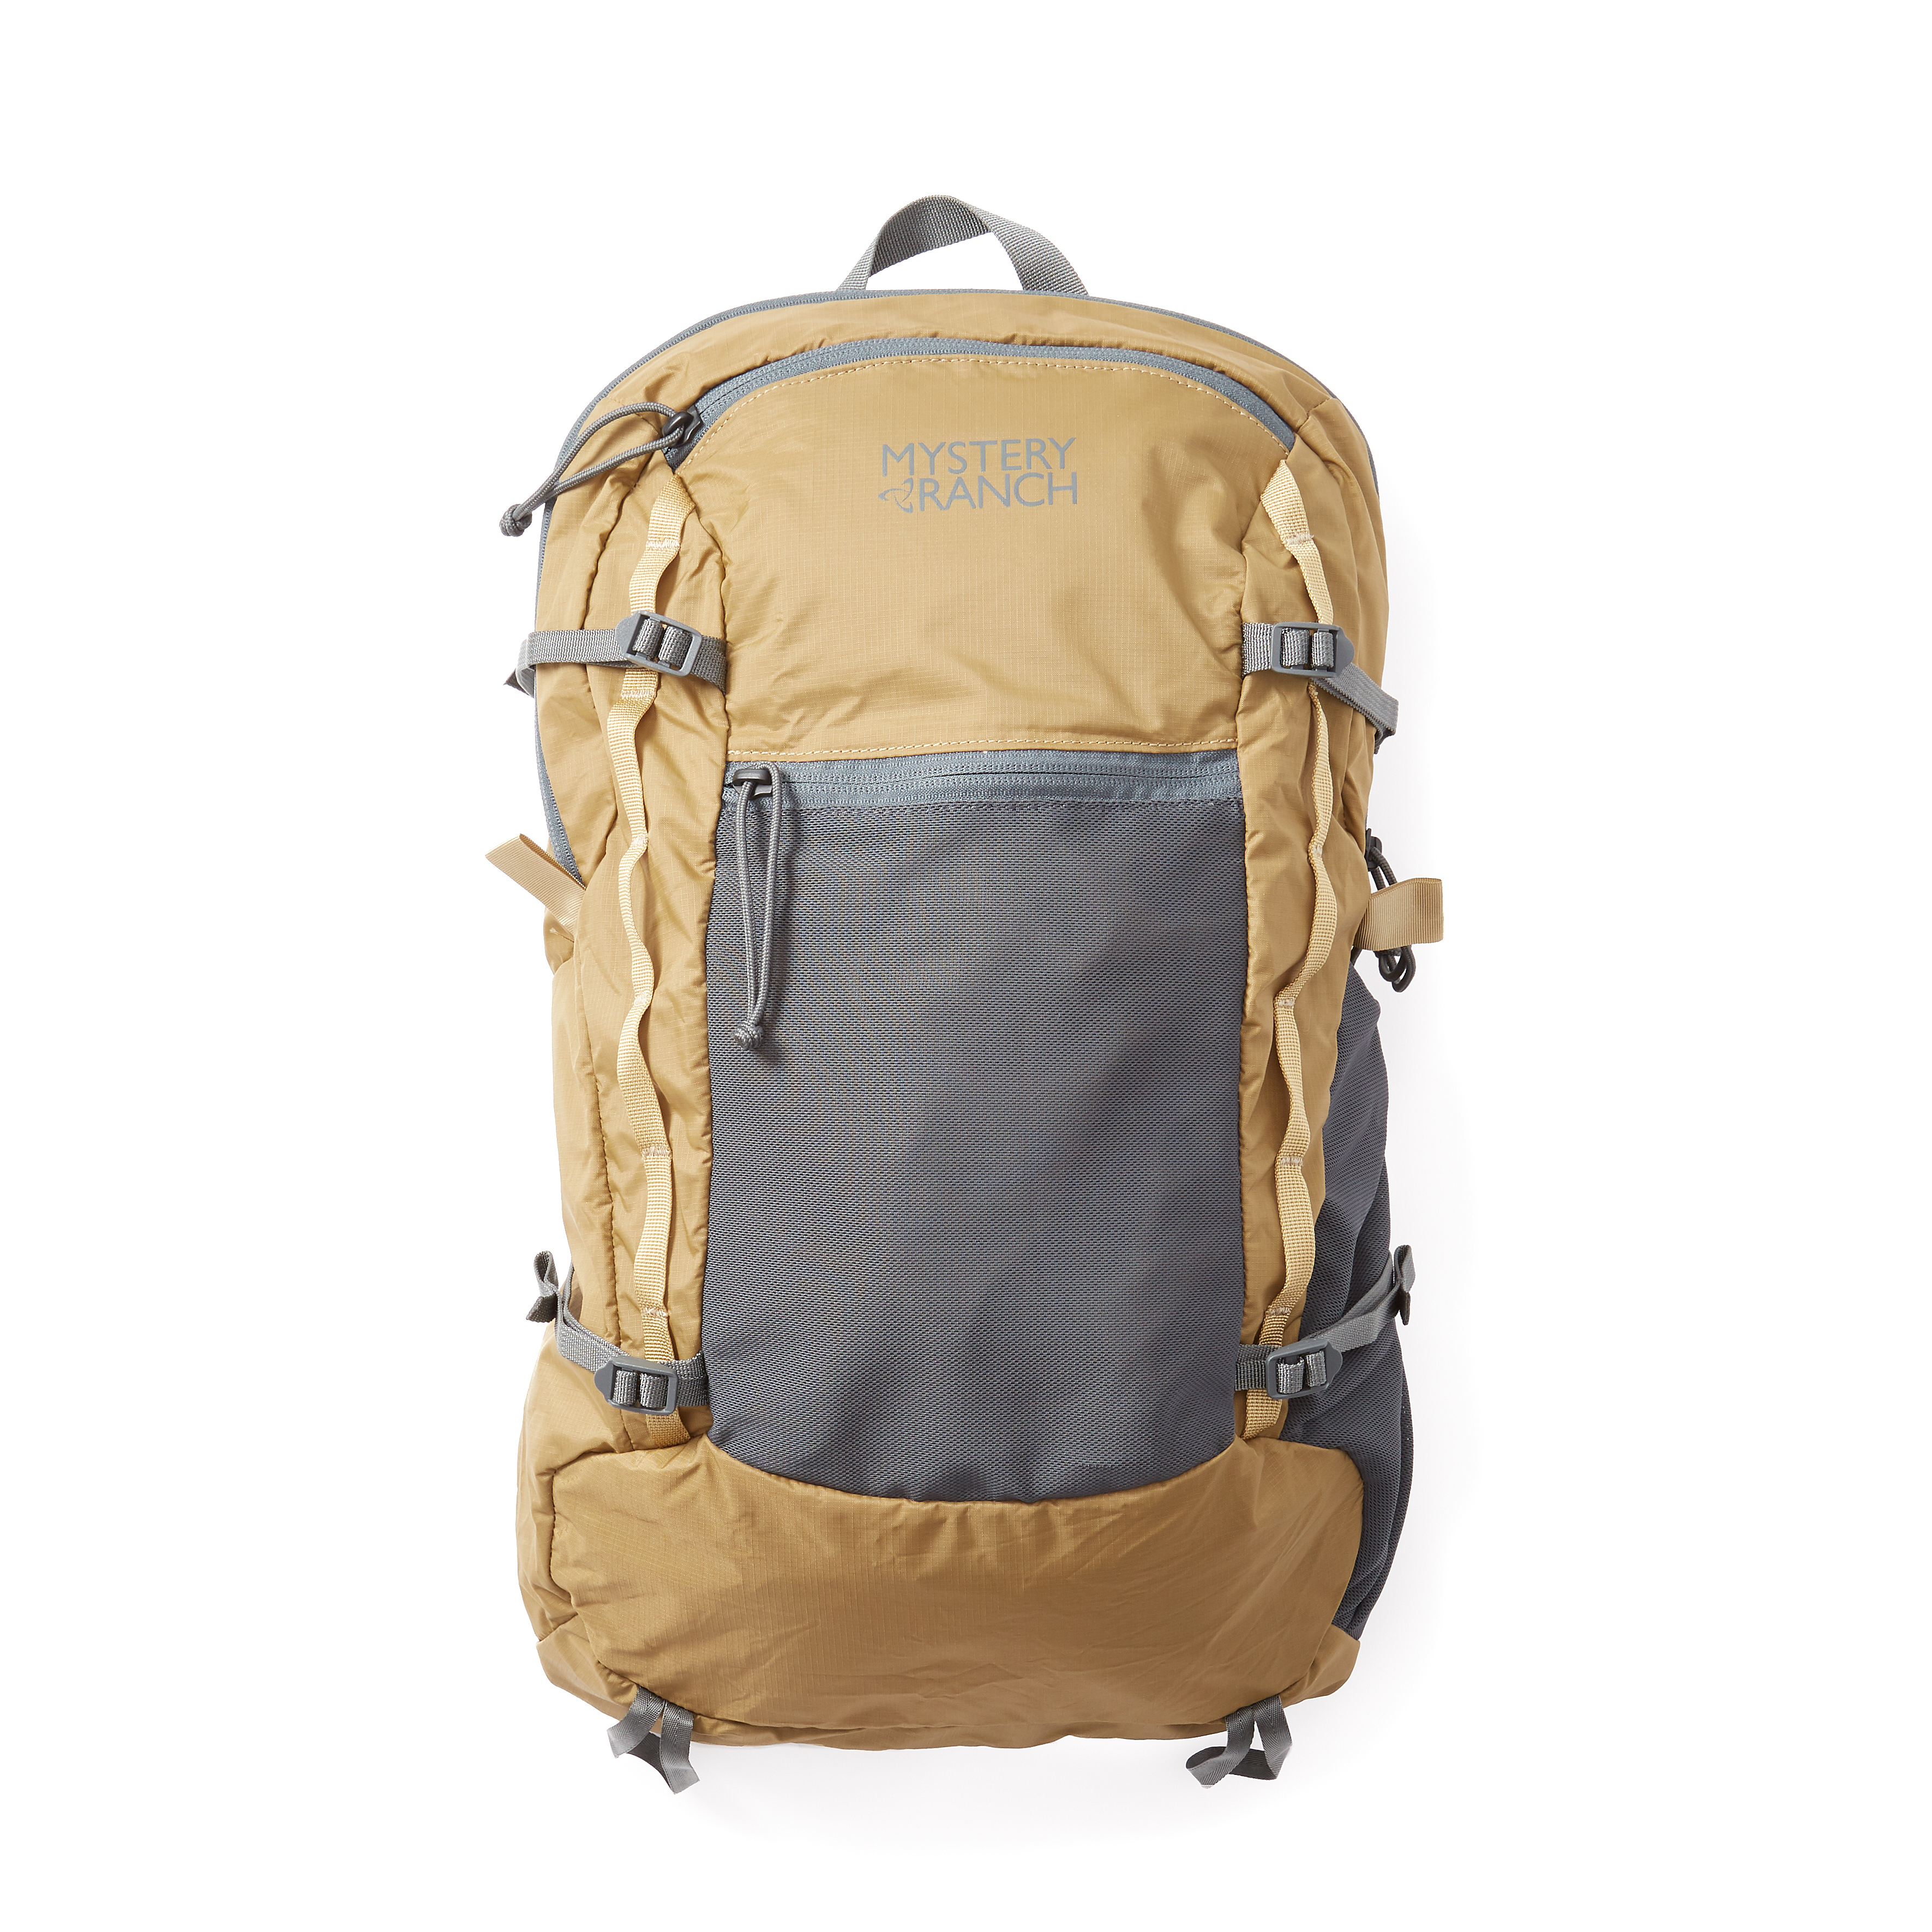 In and Out Bag Dark Khaki Mystery Ranch 